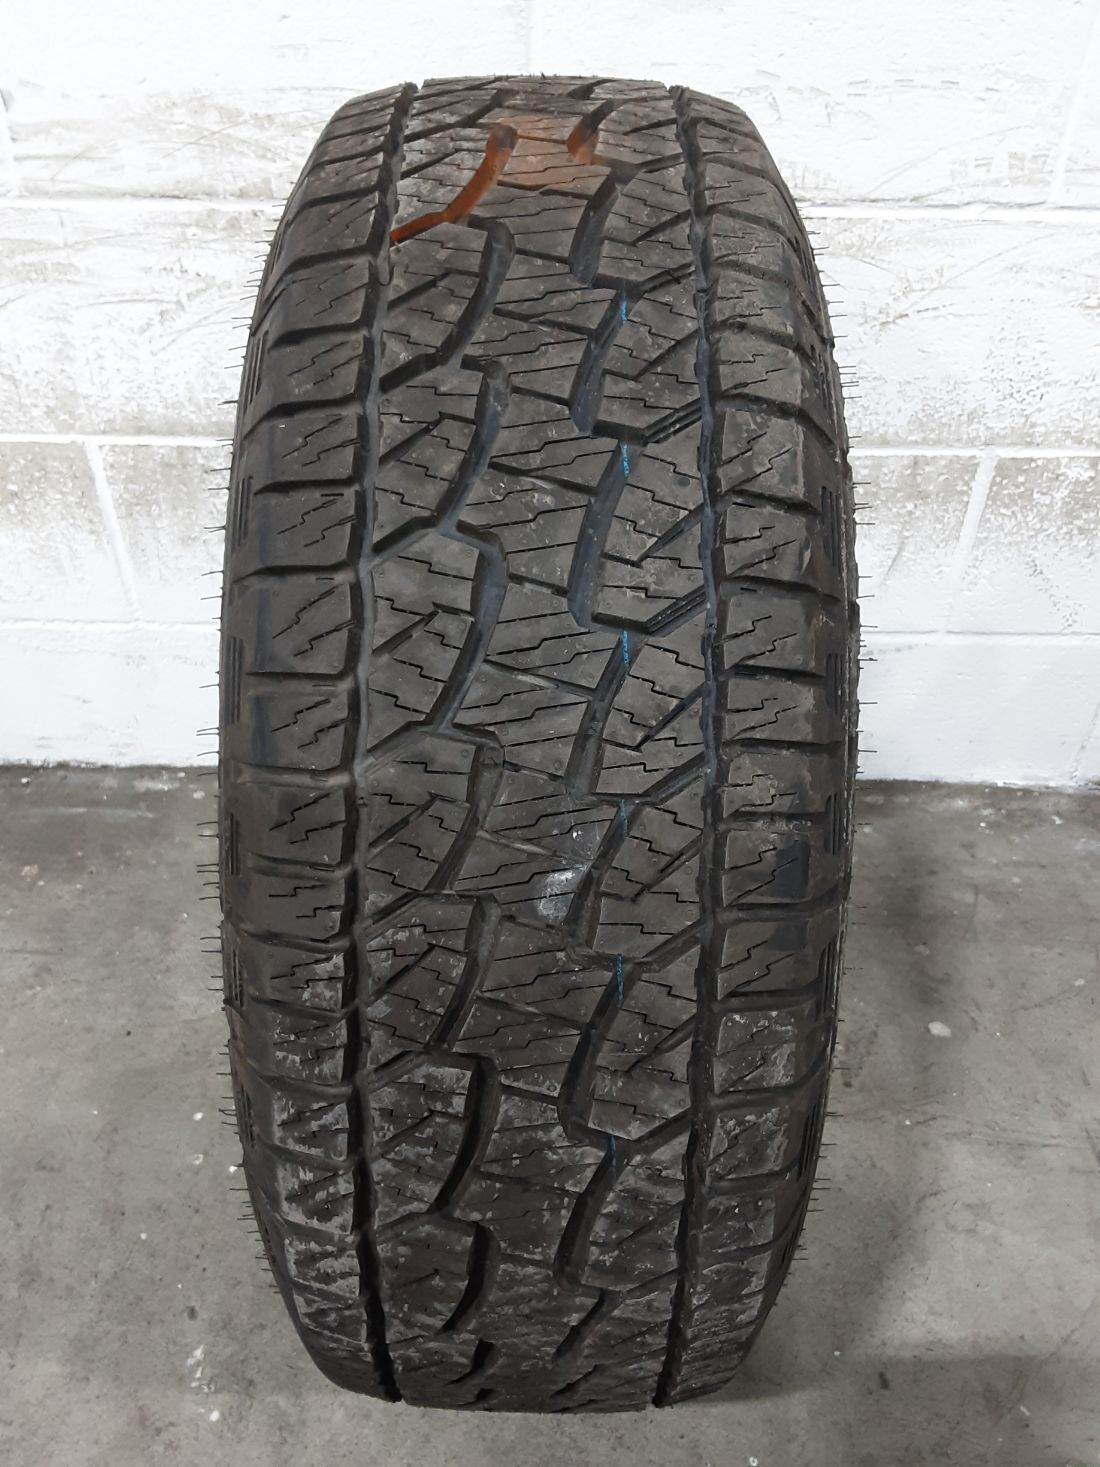 1x P265/65R17 Hankook Dynapro AT-M 12/32 Used Tire